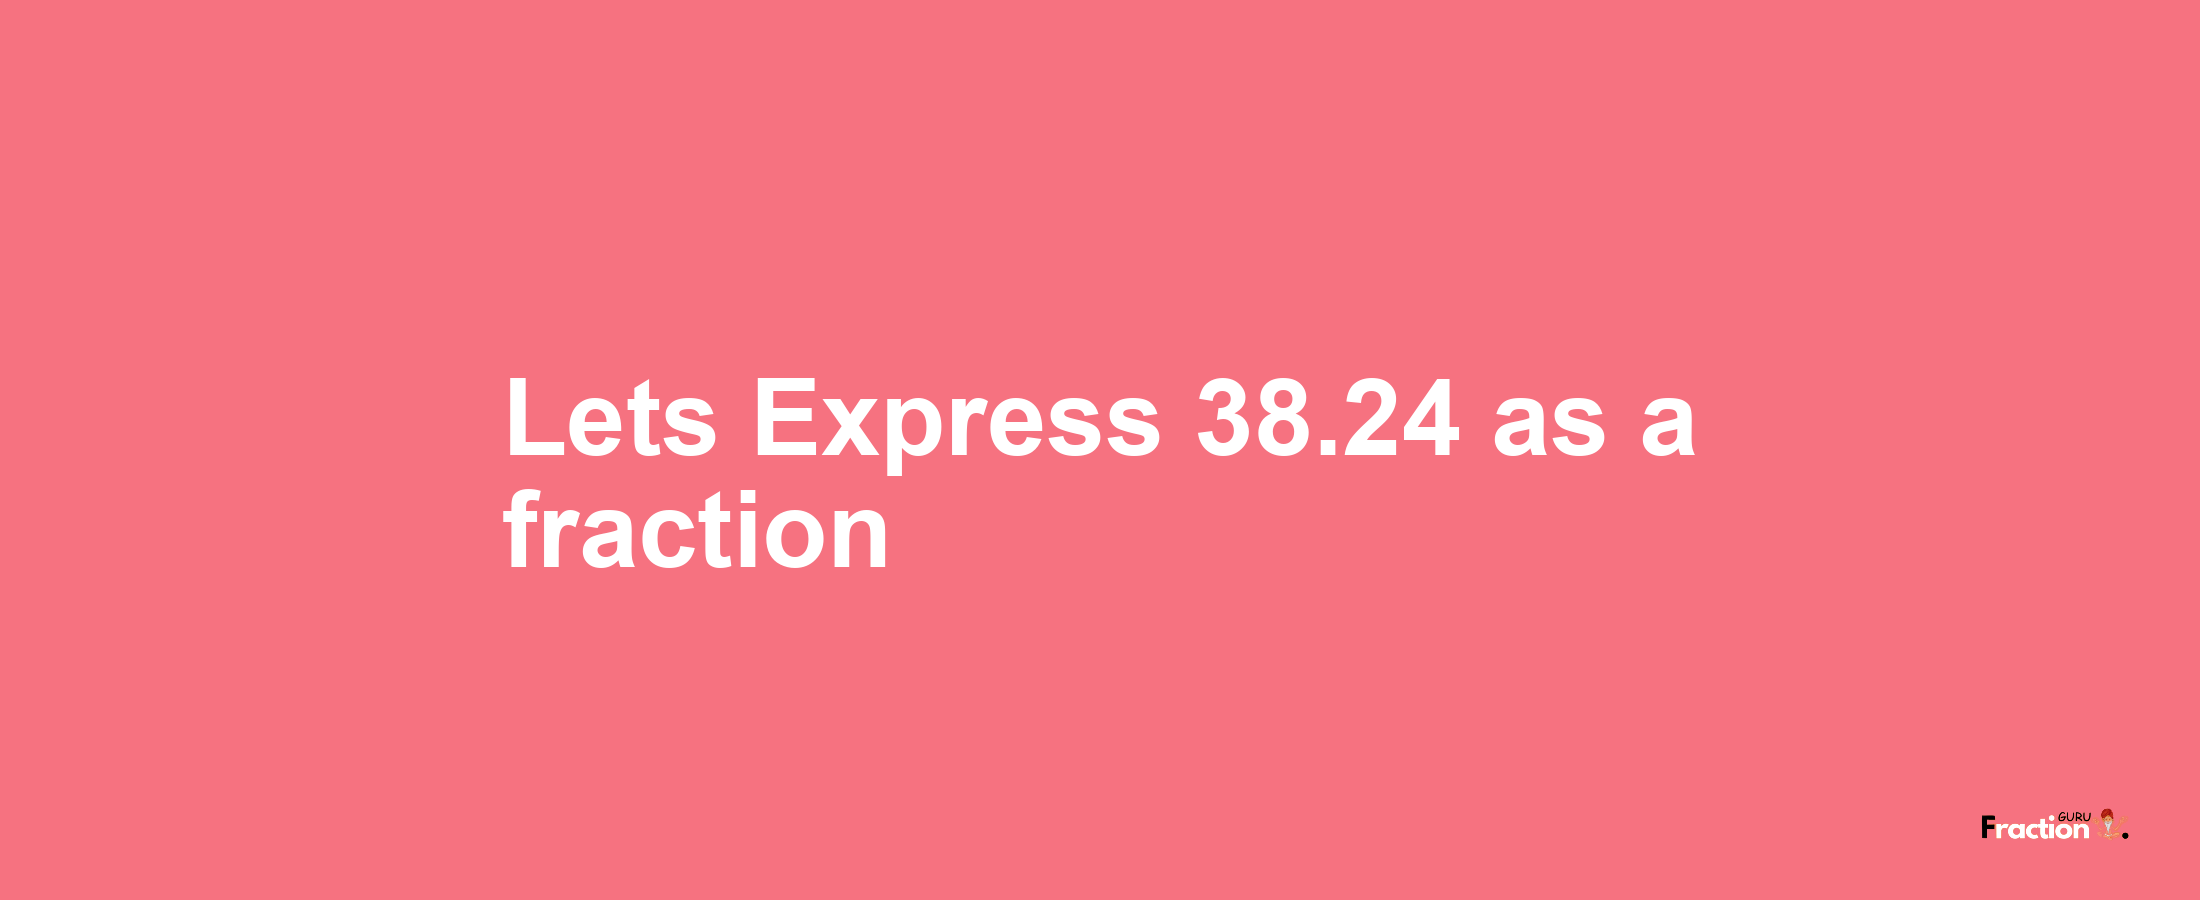 Lets Express 38.24 as afraction